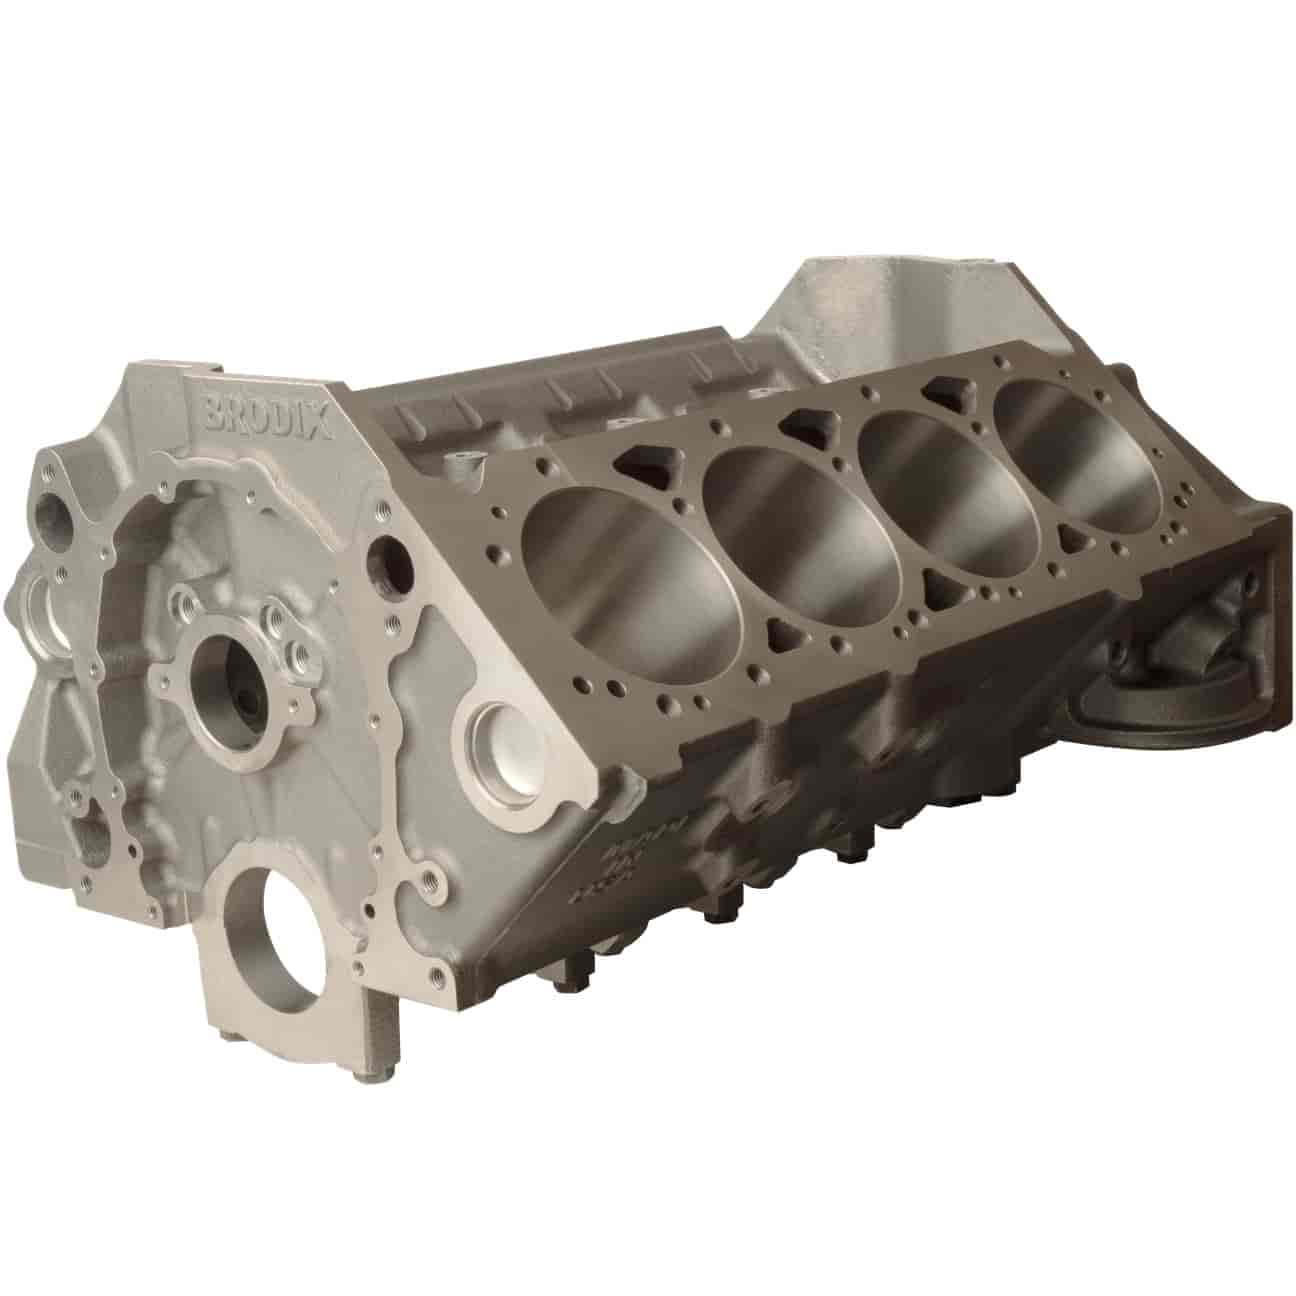 Cast Iron Small Block Chevy Bare Engine Block [4 in. Bore, 350 Mains]